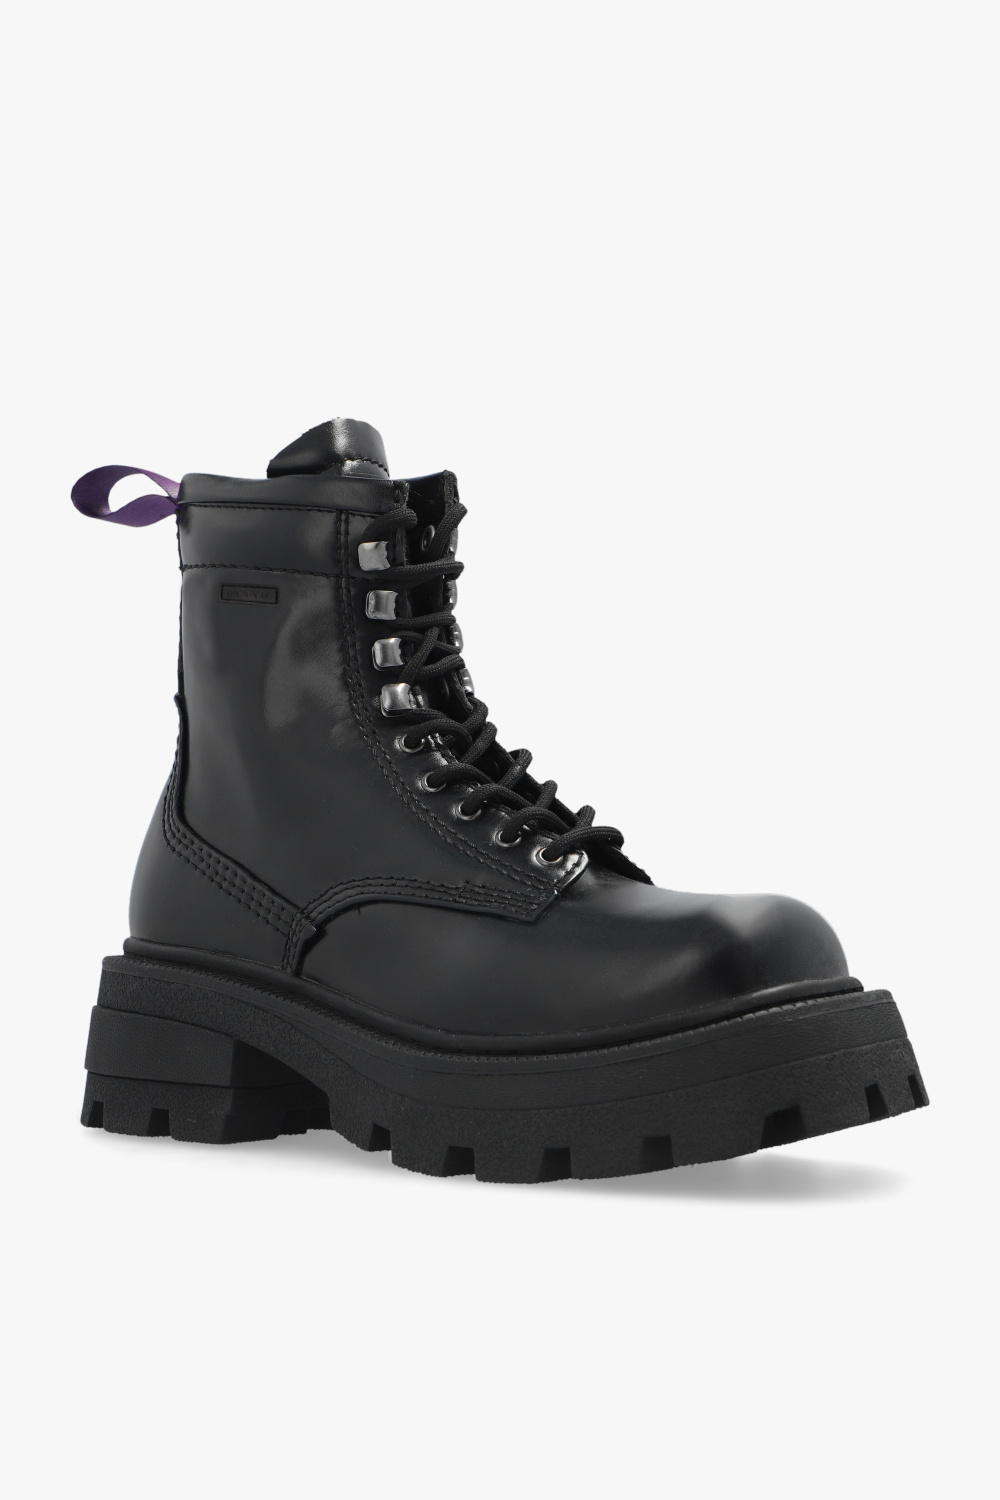 Eytys ’Michigan’ leather combat boots